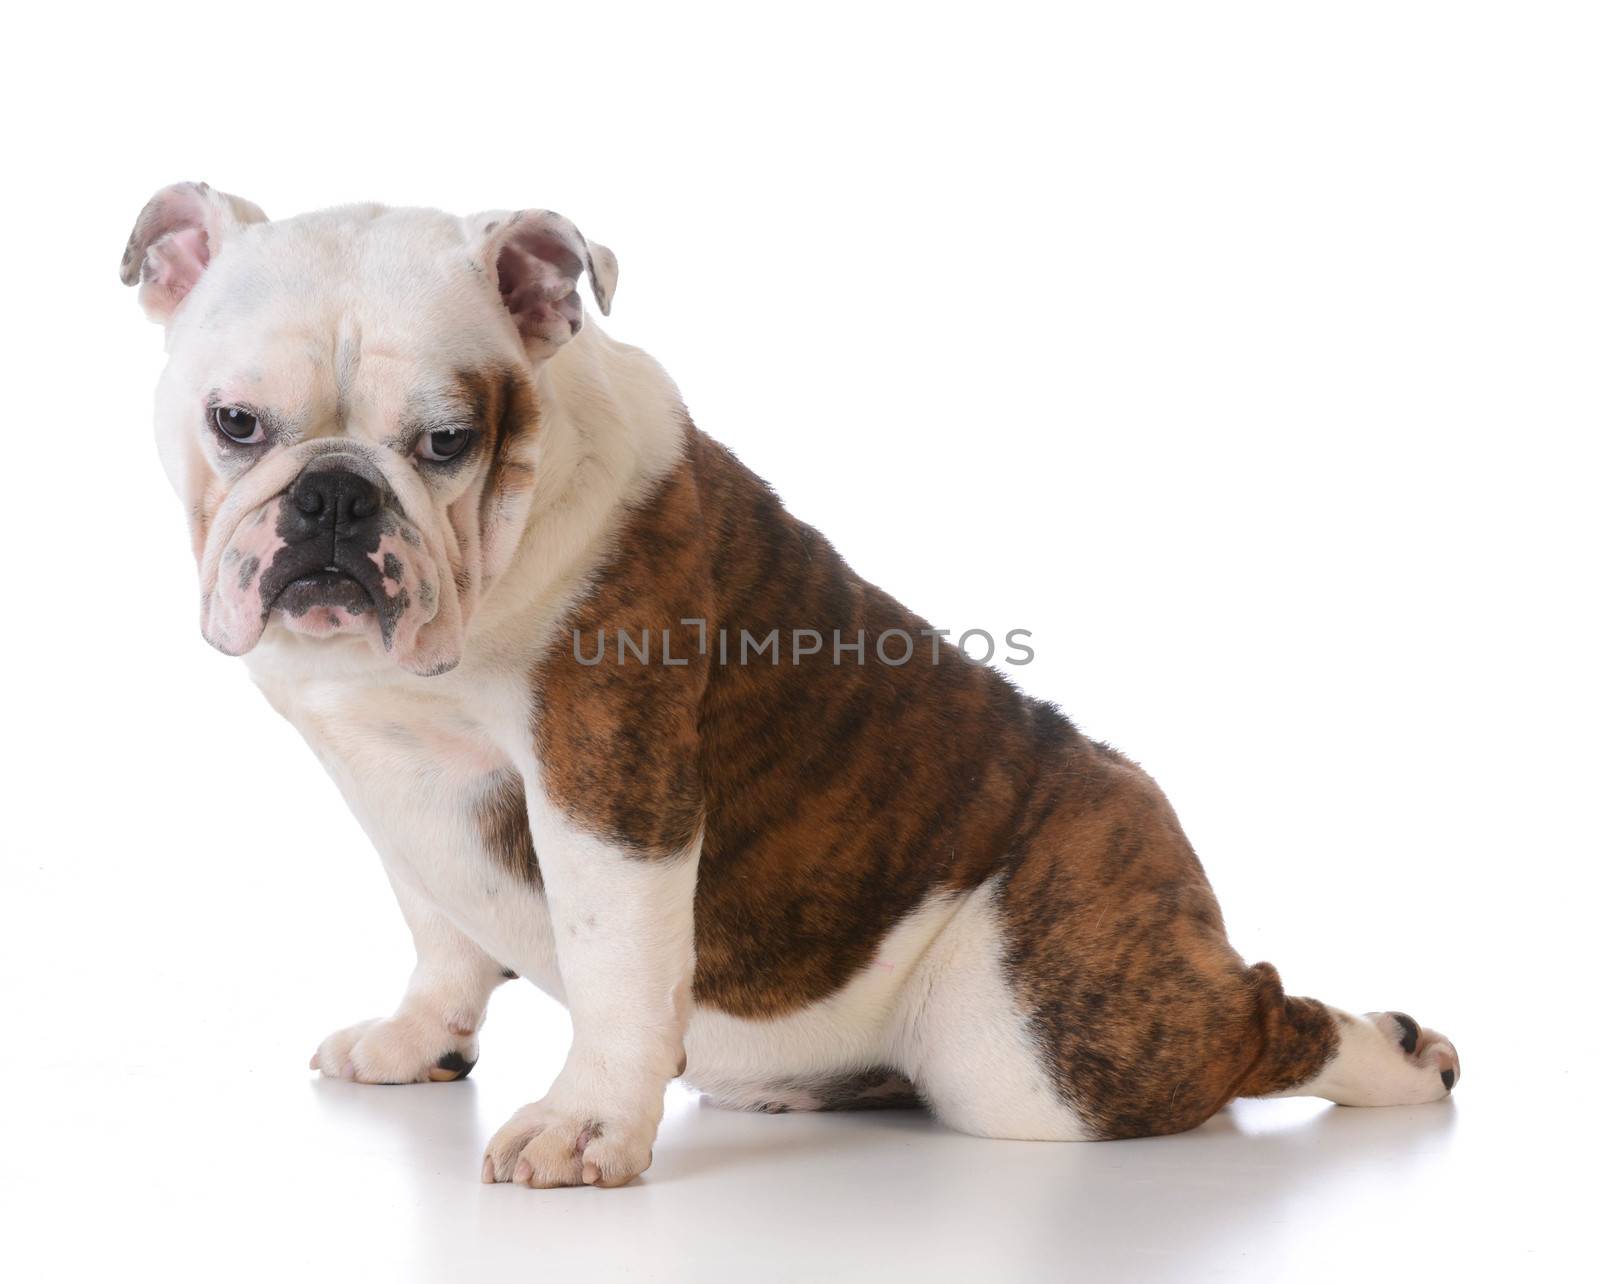 cute bulldog puppy sitting with back leg stretched out behind on white background